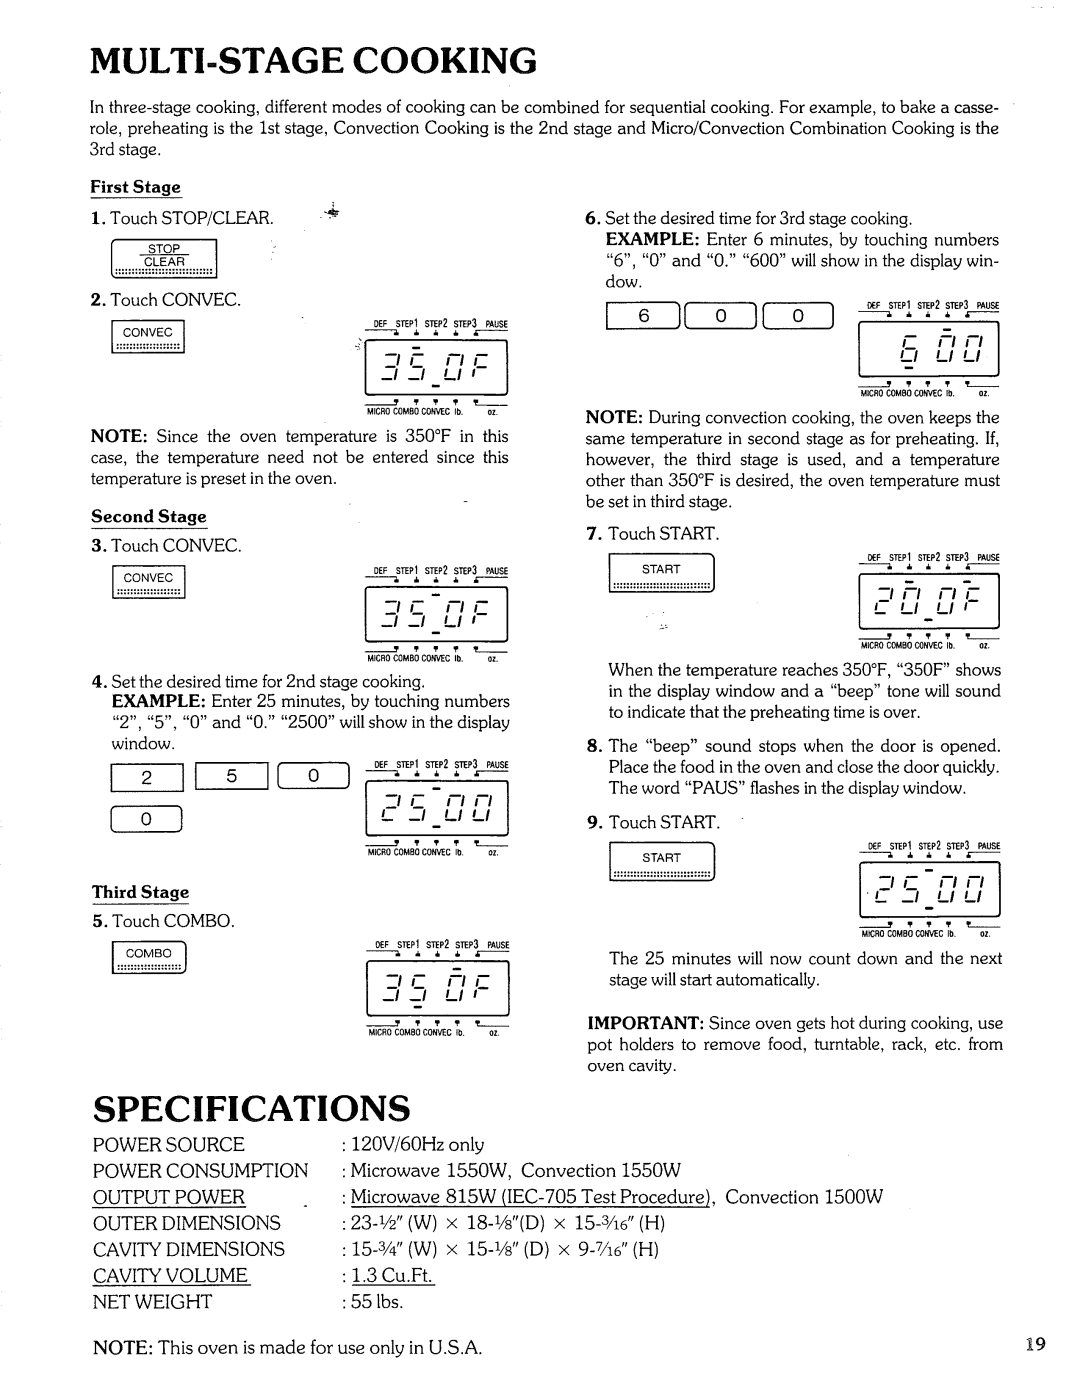 Sears Microwave Oven manual Multi-Stagecooking, Specifications, 35 LI-,--I, OMB Co, C l e. l LI, I -1 LI--LI-I 